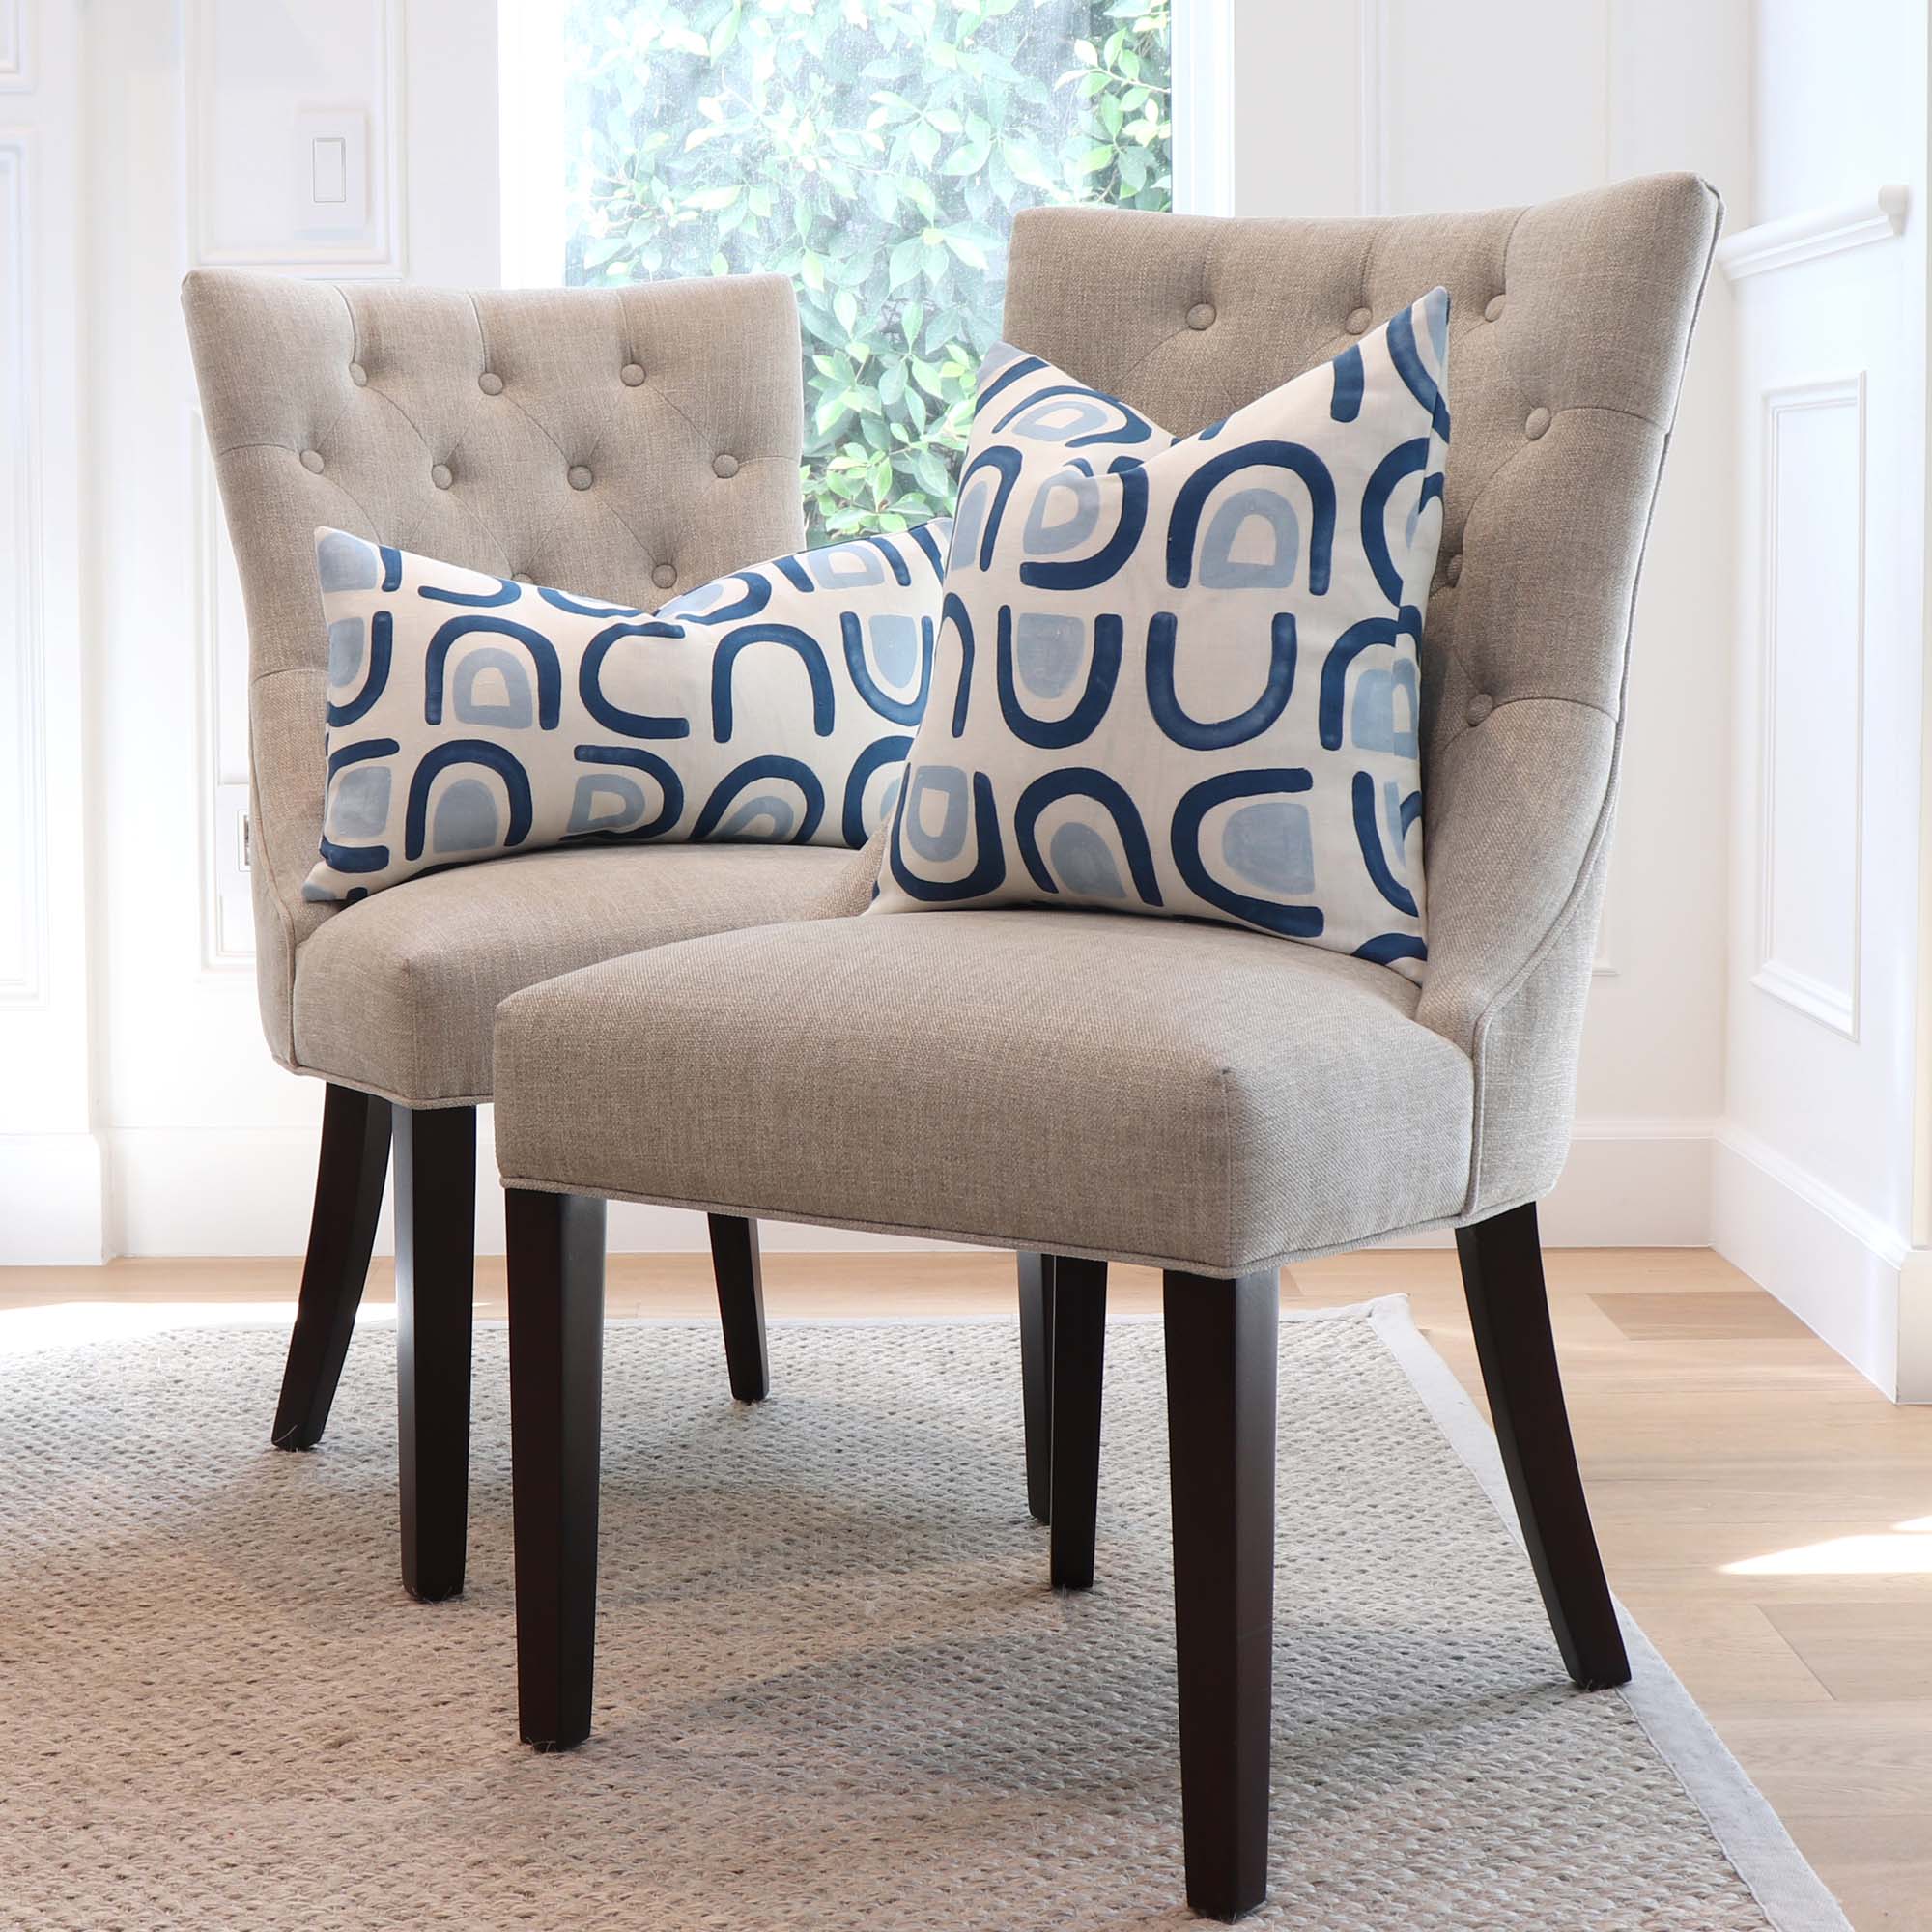 https://www.chloeandolive.com/cdn/shop/products/Schumacher-Hidaya-Williams-Threshold-Lapis-Blue-180422-Graphic-Print-Linen-Decorative-Throw-Pillow-Cover-on-Armless-Chairs-in-Home_2000x.jpg?v=1665942890